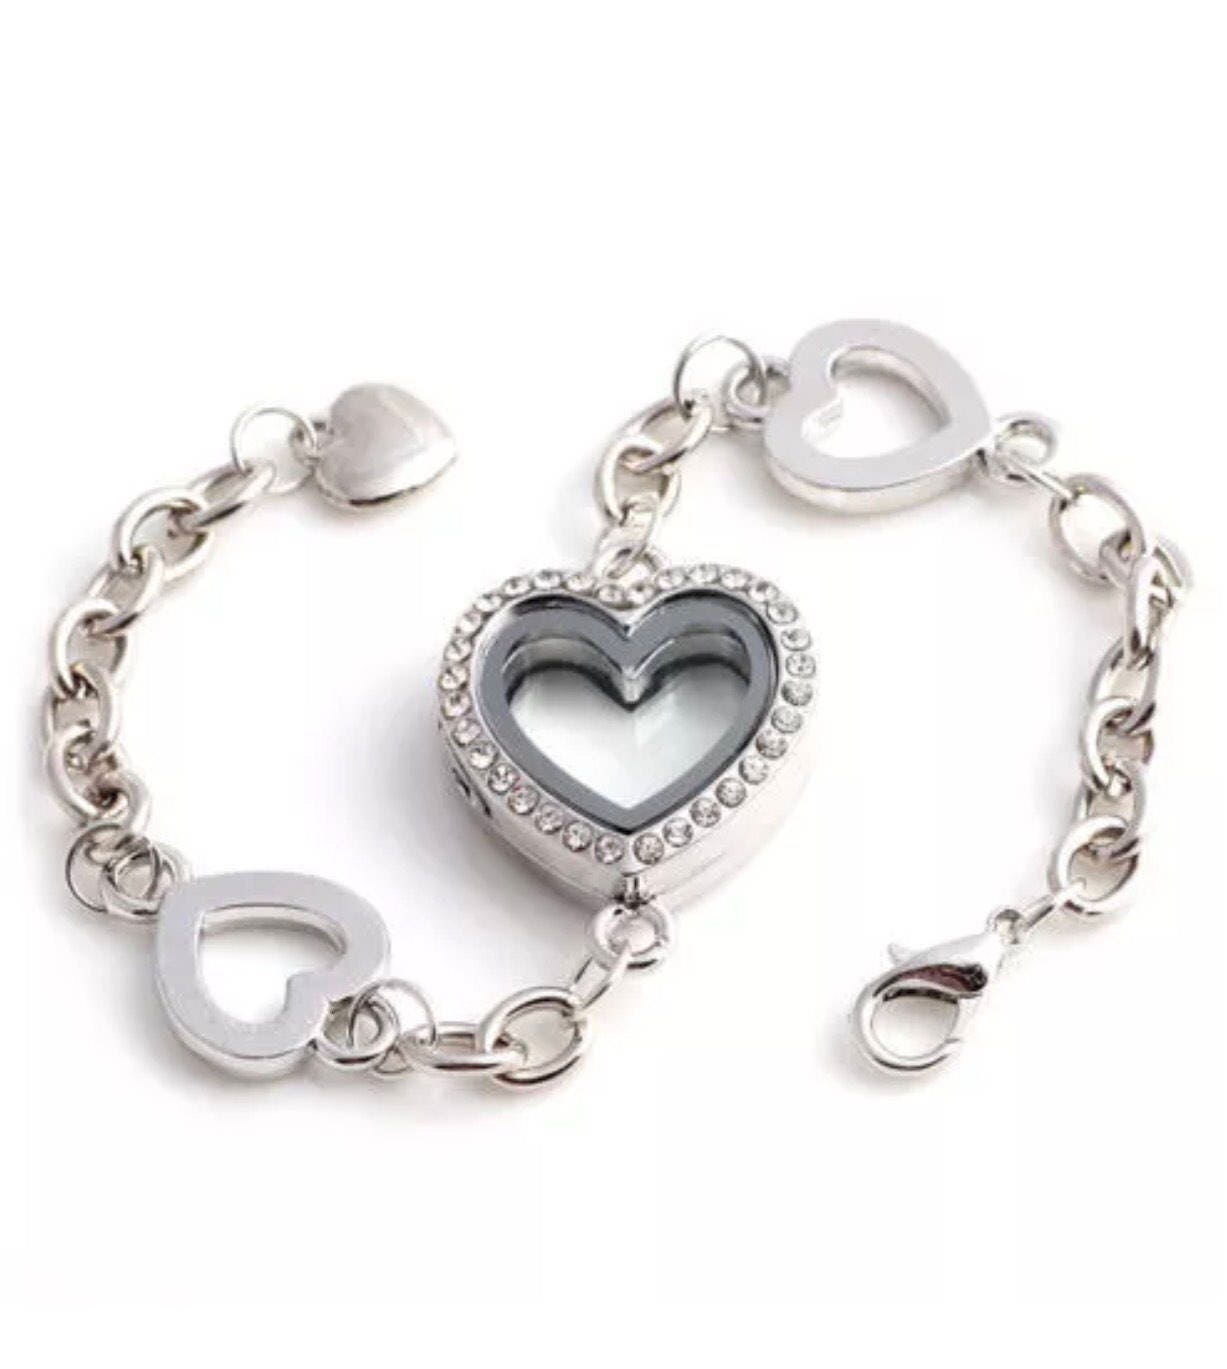 Wholesale 316L Stainless Steel Locket Charm Bracelet With Magnetic Closure  And Floating Locket Design, 25mm And 30mm Widths, Including Matching Rolo  Chain From Yuntengqz, $9.43 | DHgate.Com